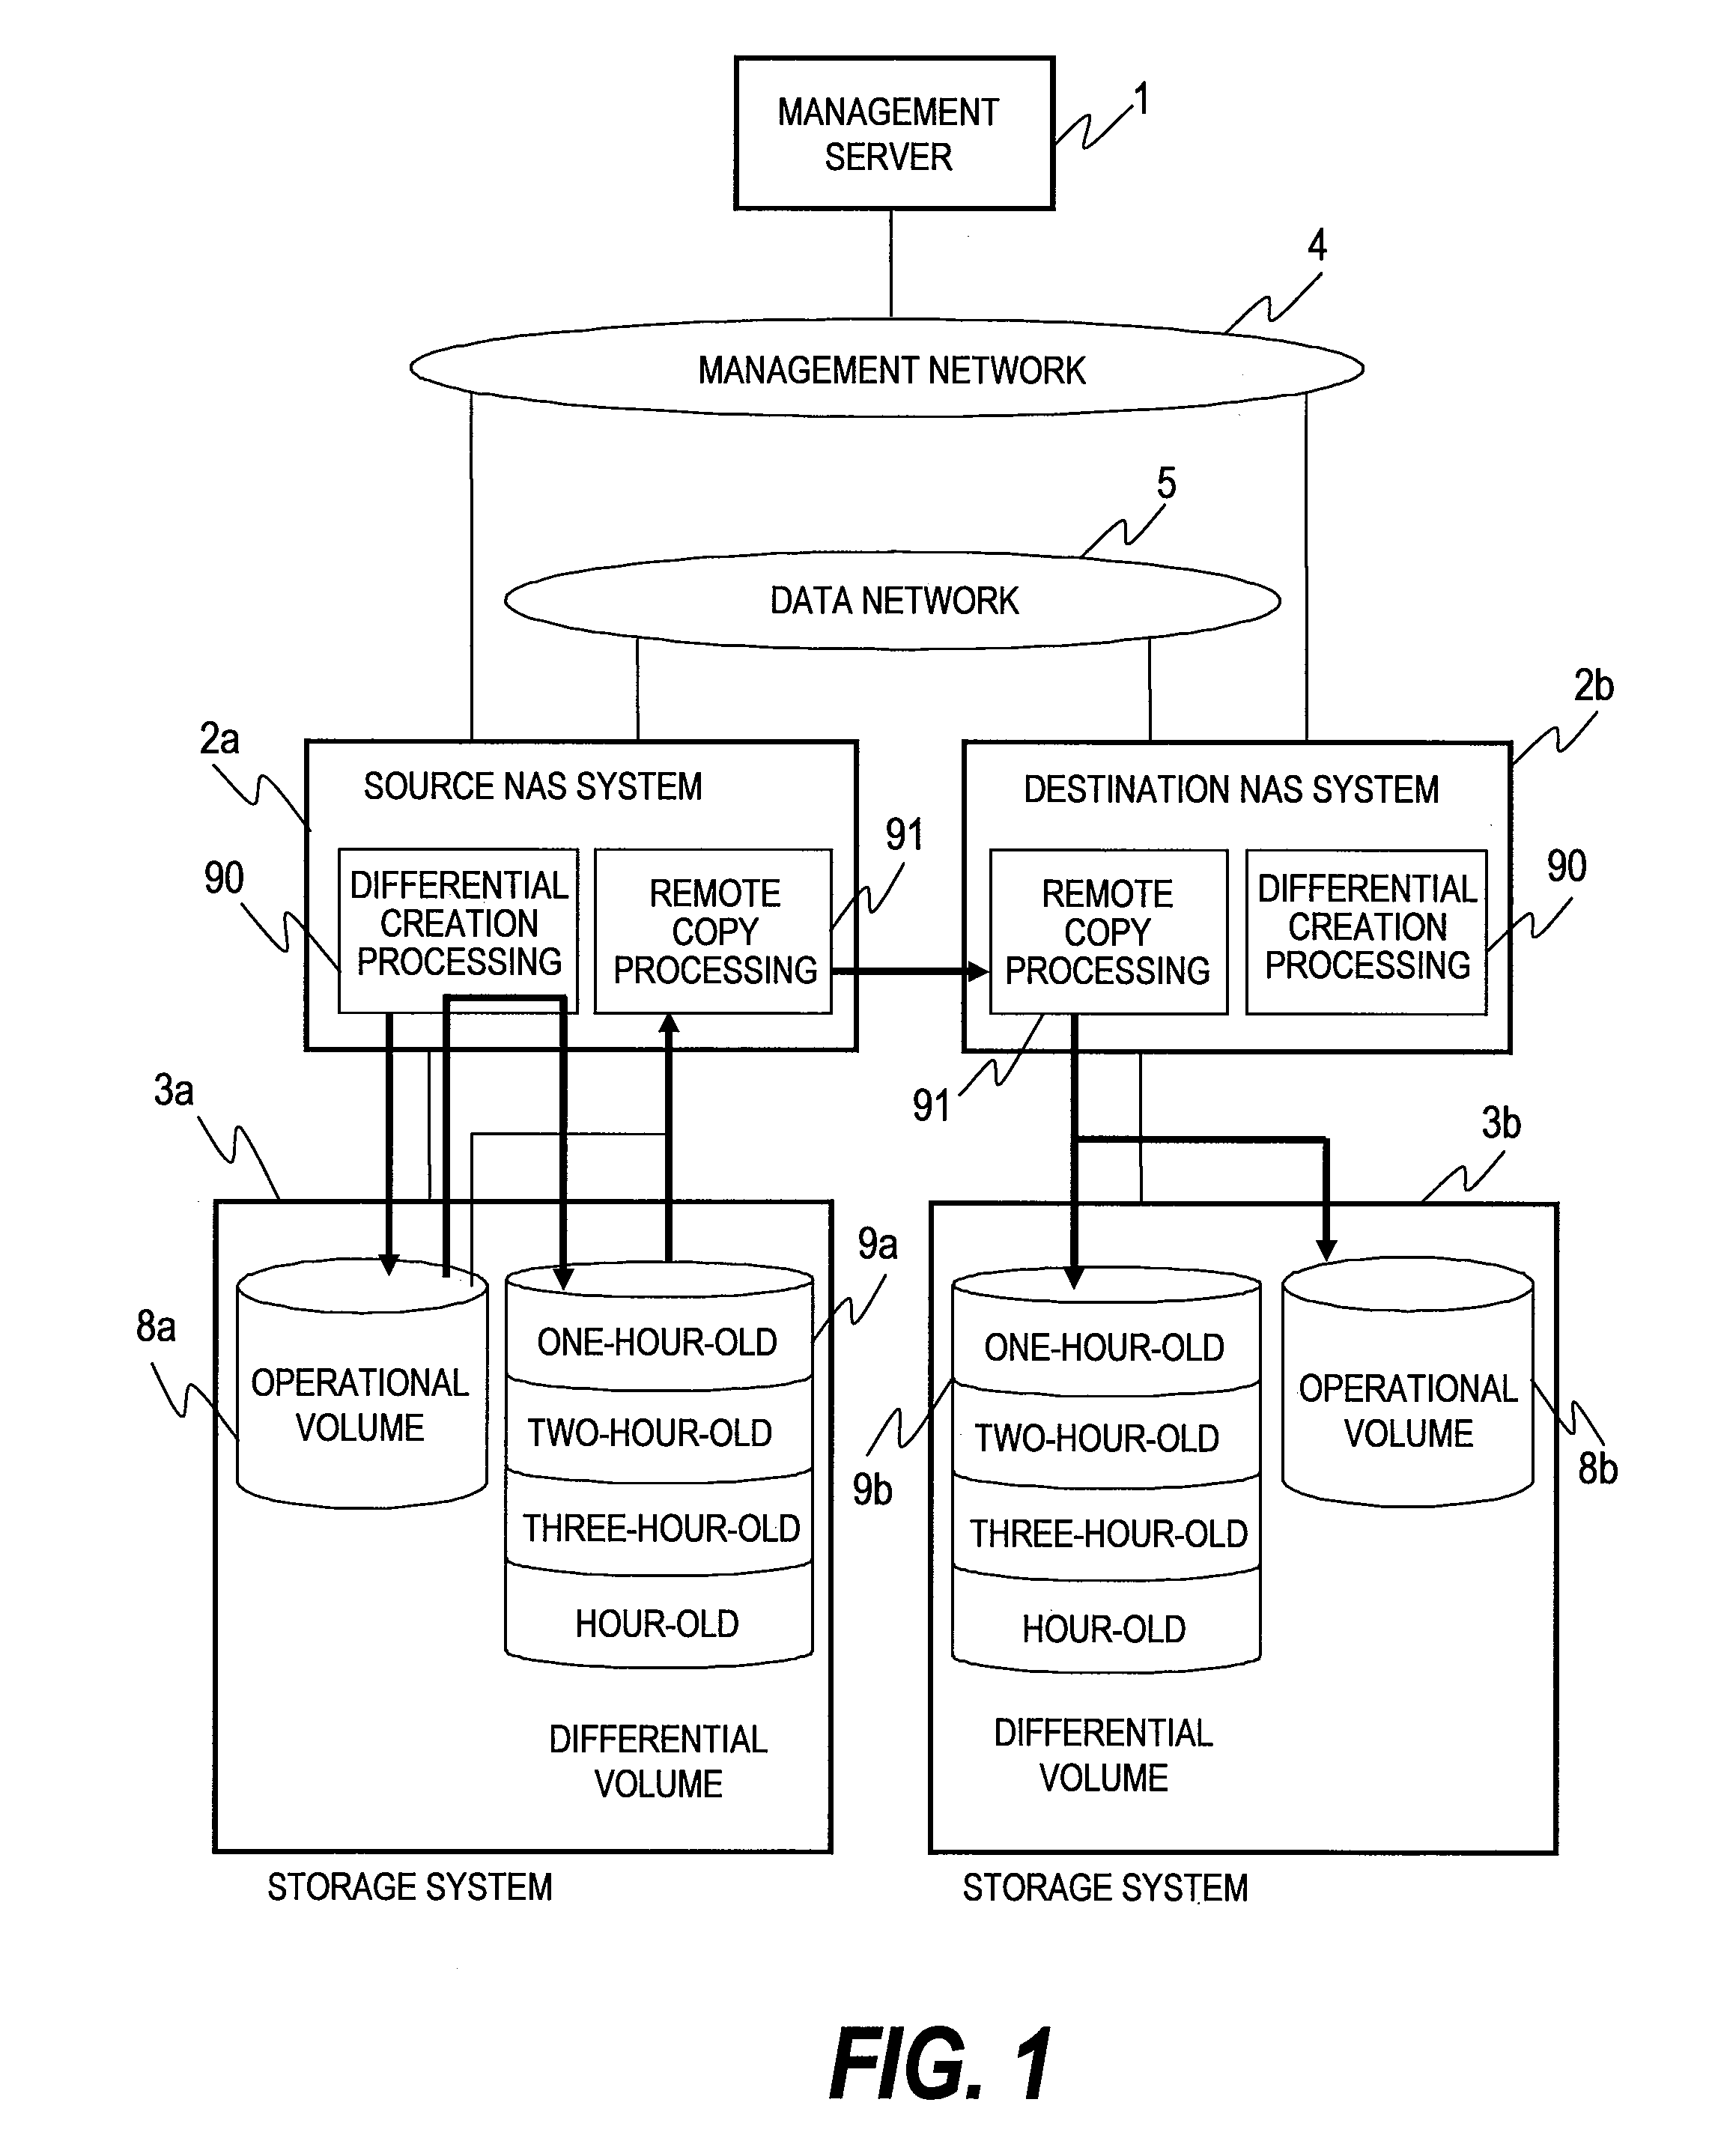 Data recovery method in differential remote backup for a NAS system